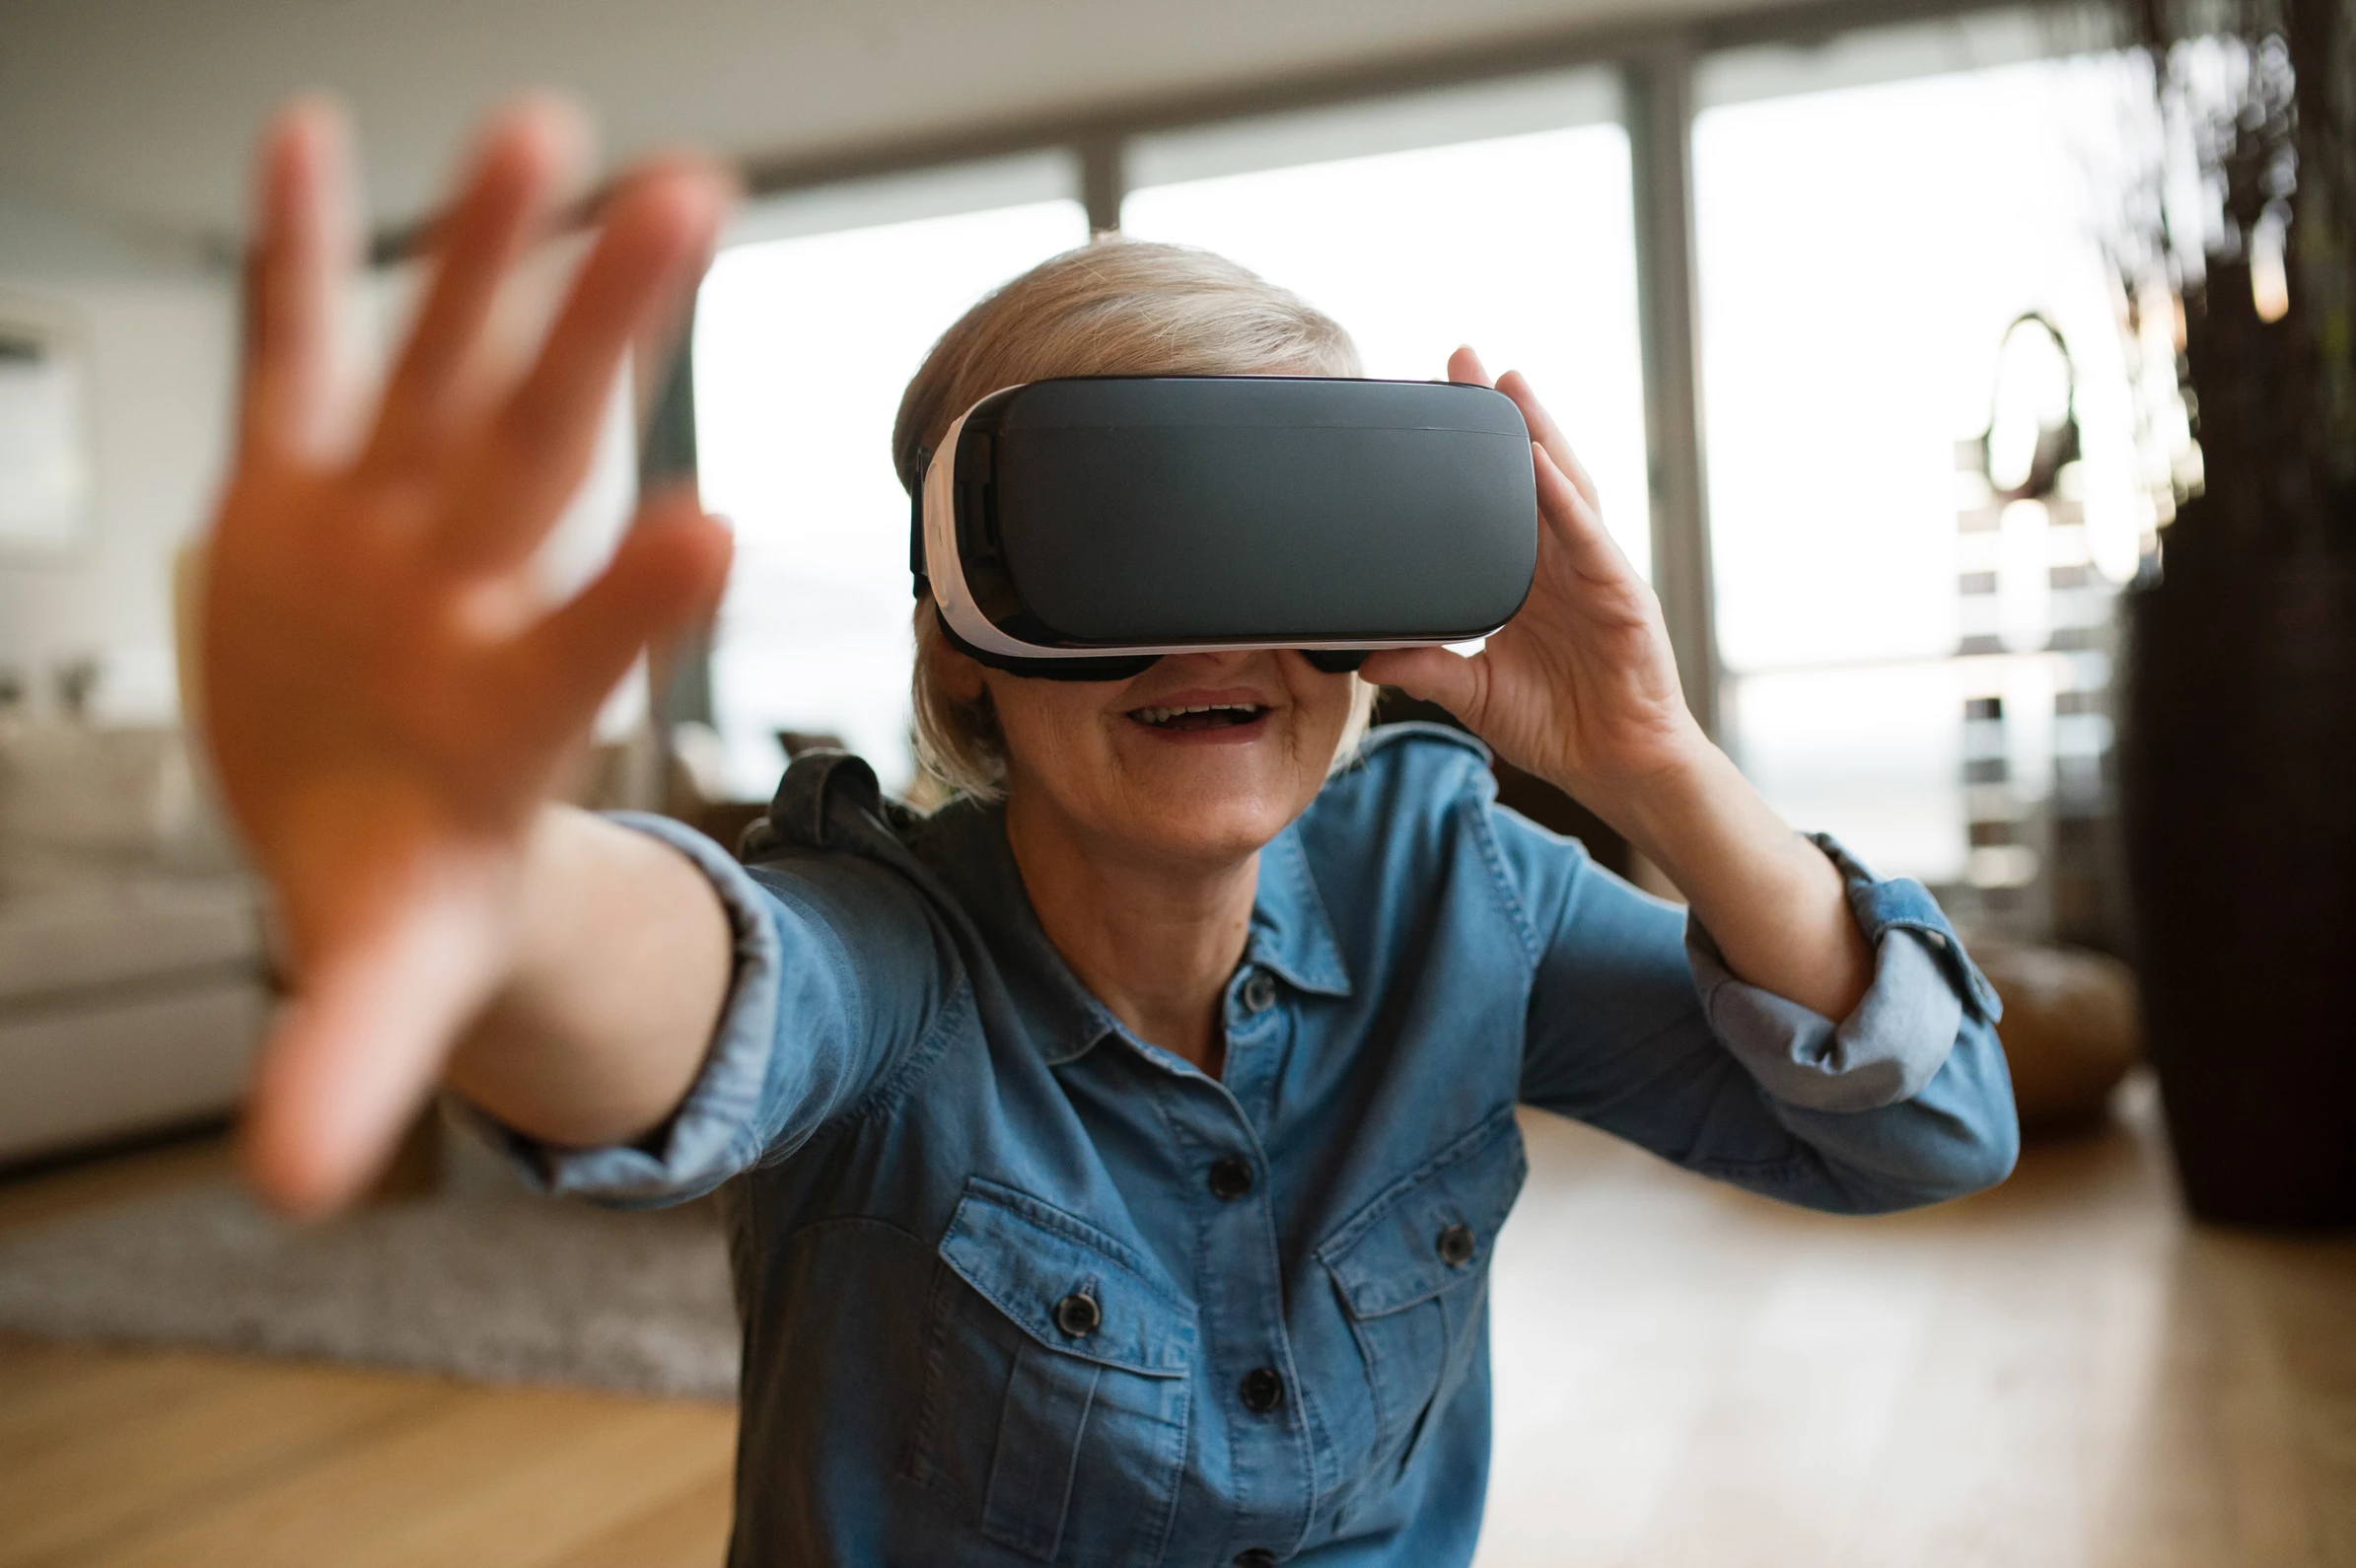 Frequently asked questions about cognitive stimulation through Virtual Reality